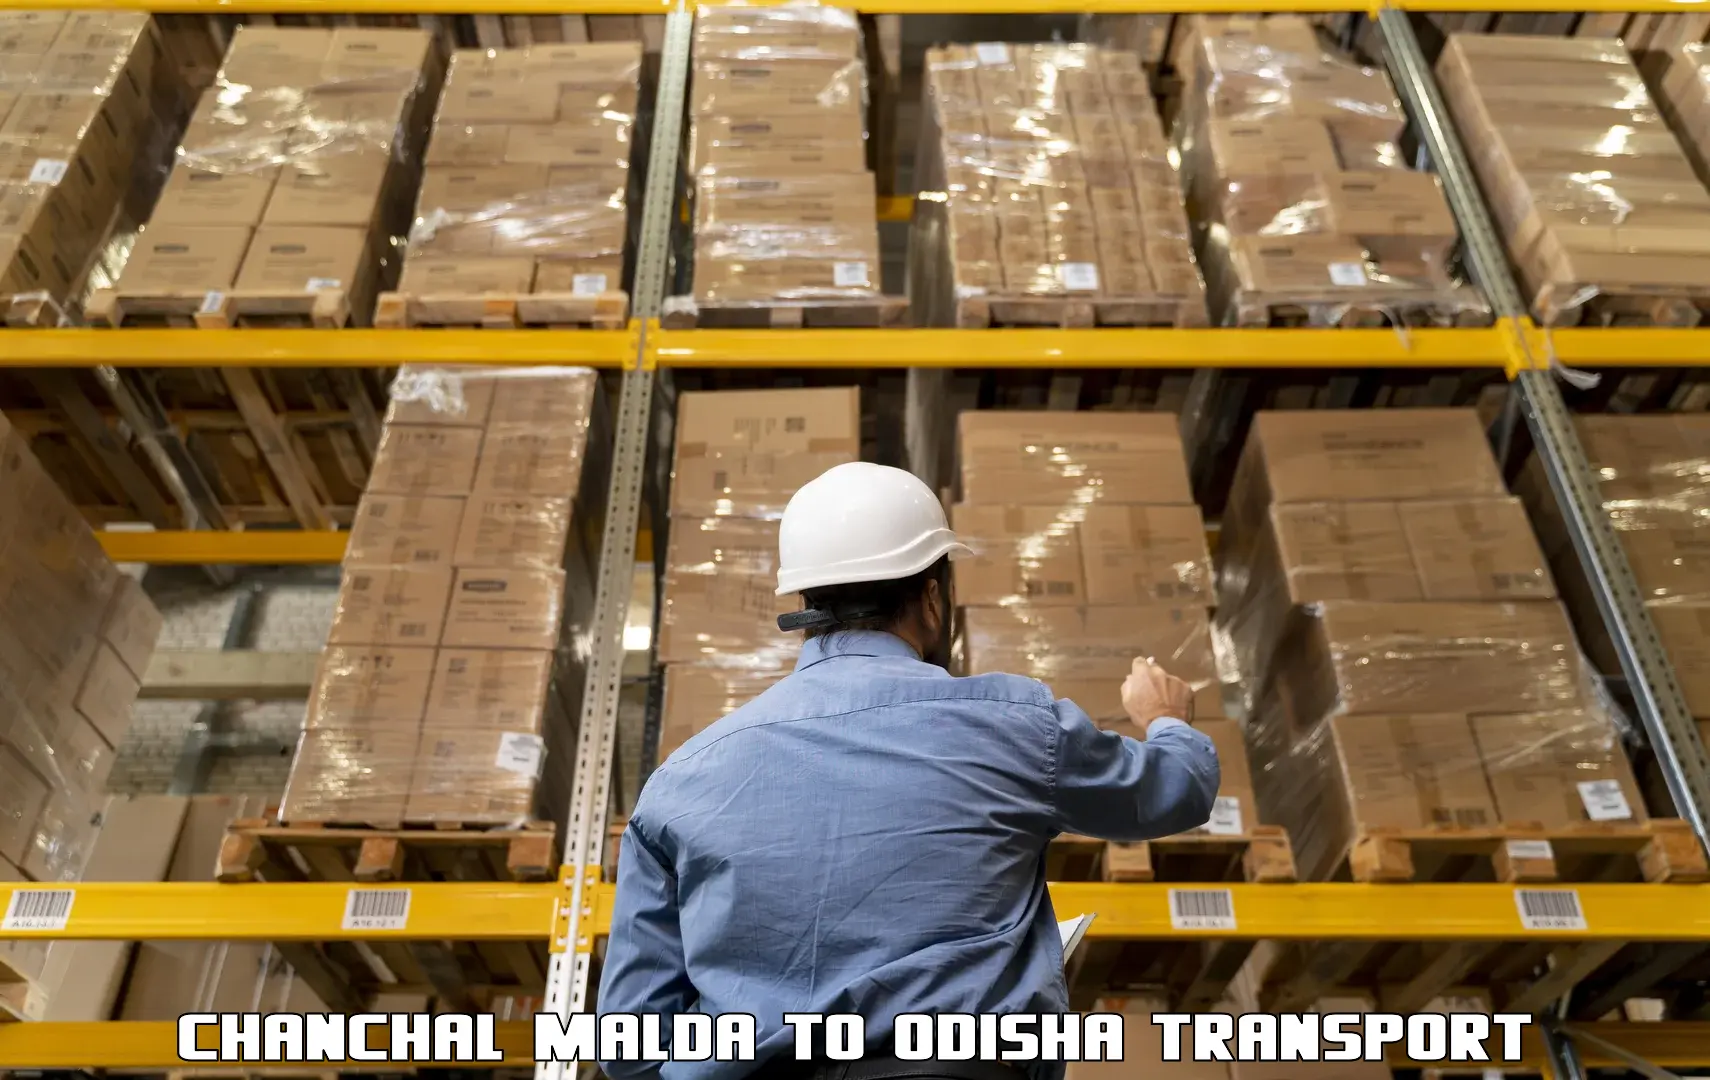 Truck transport companies in India Chanchal Malda to Jashipur